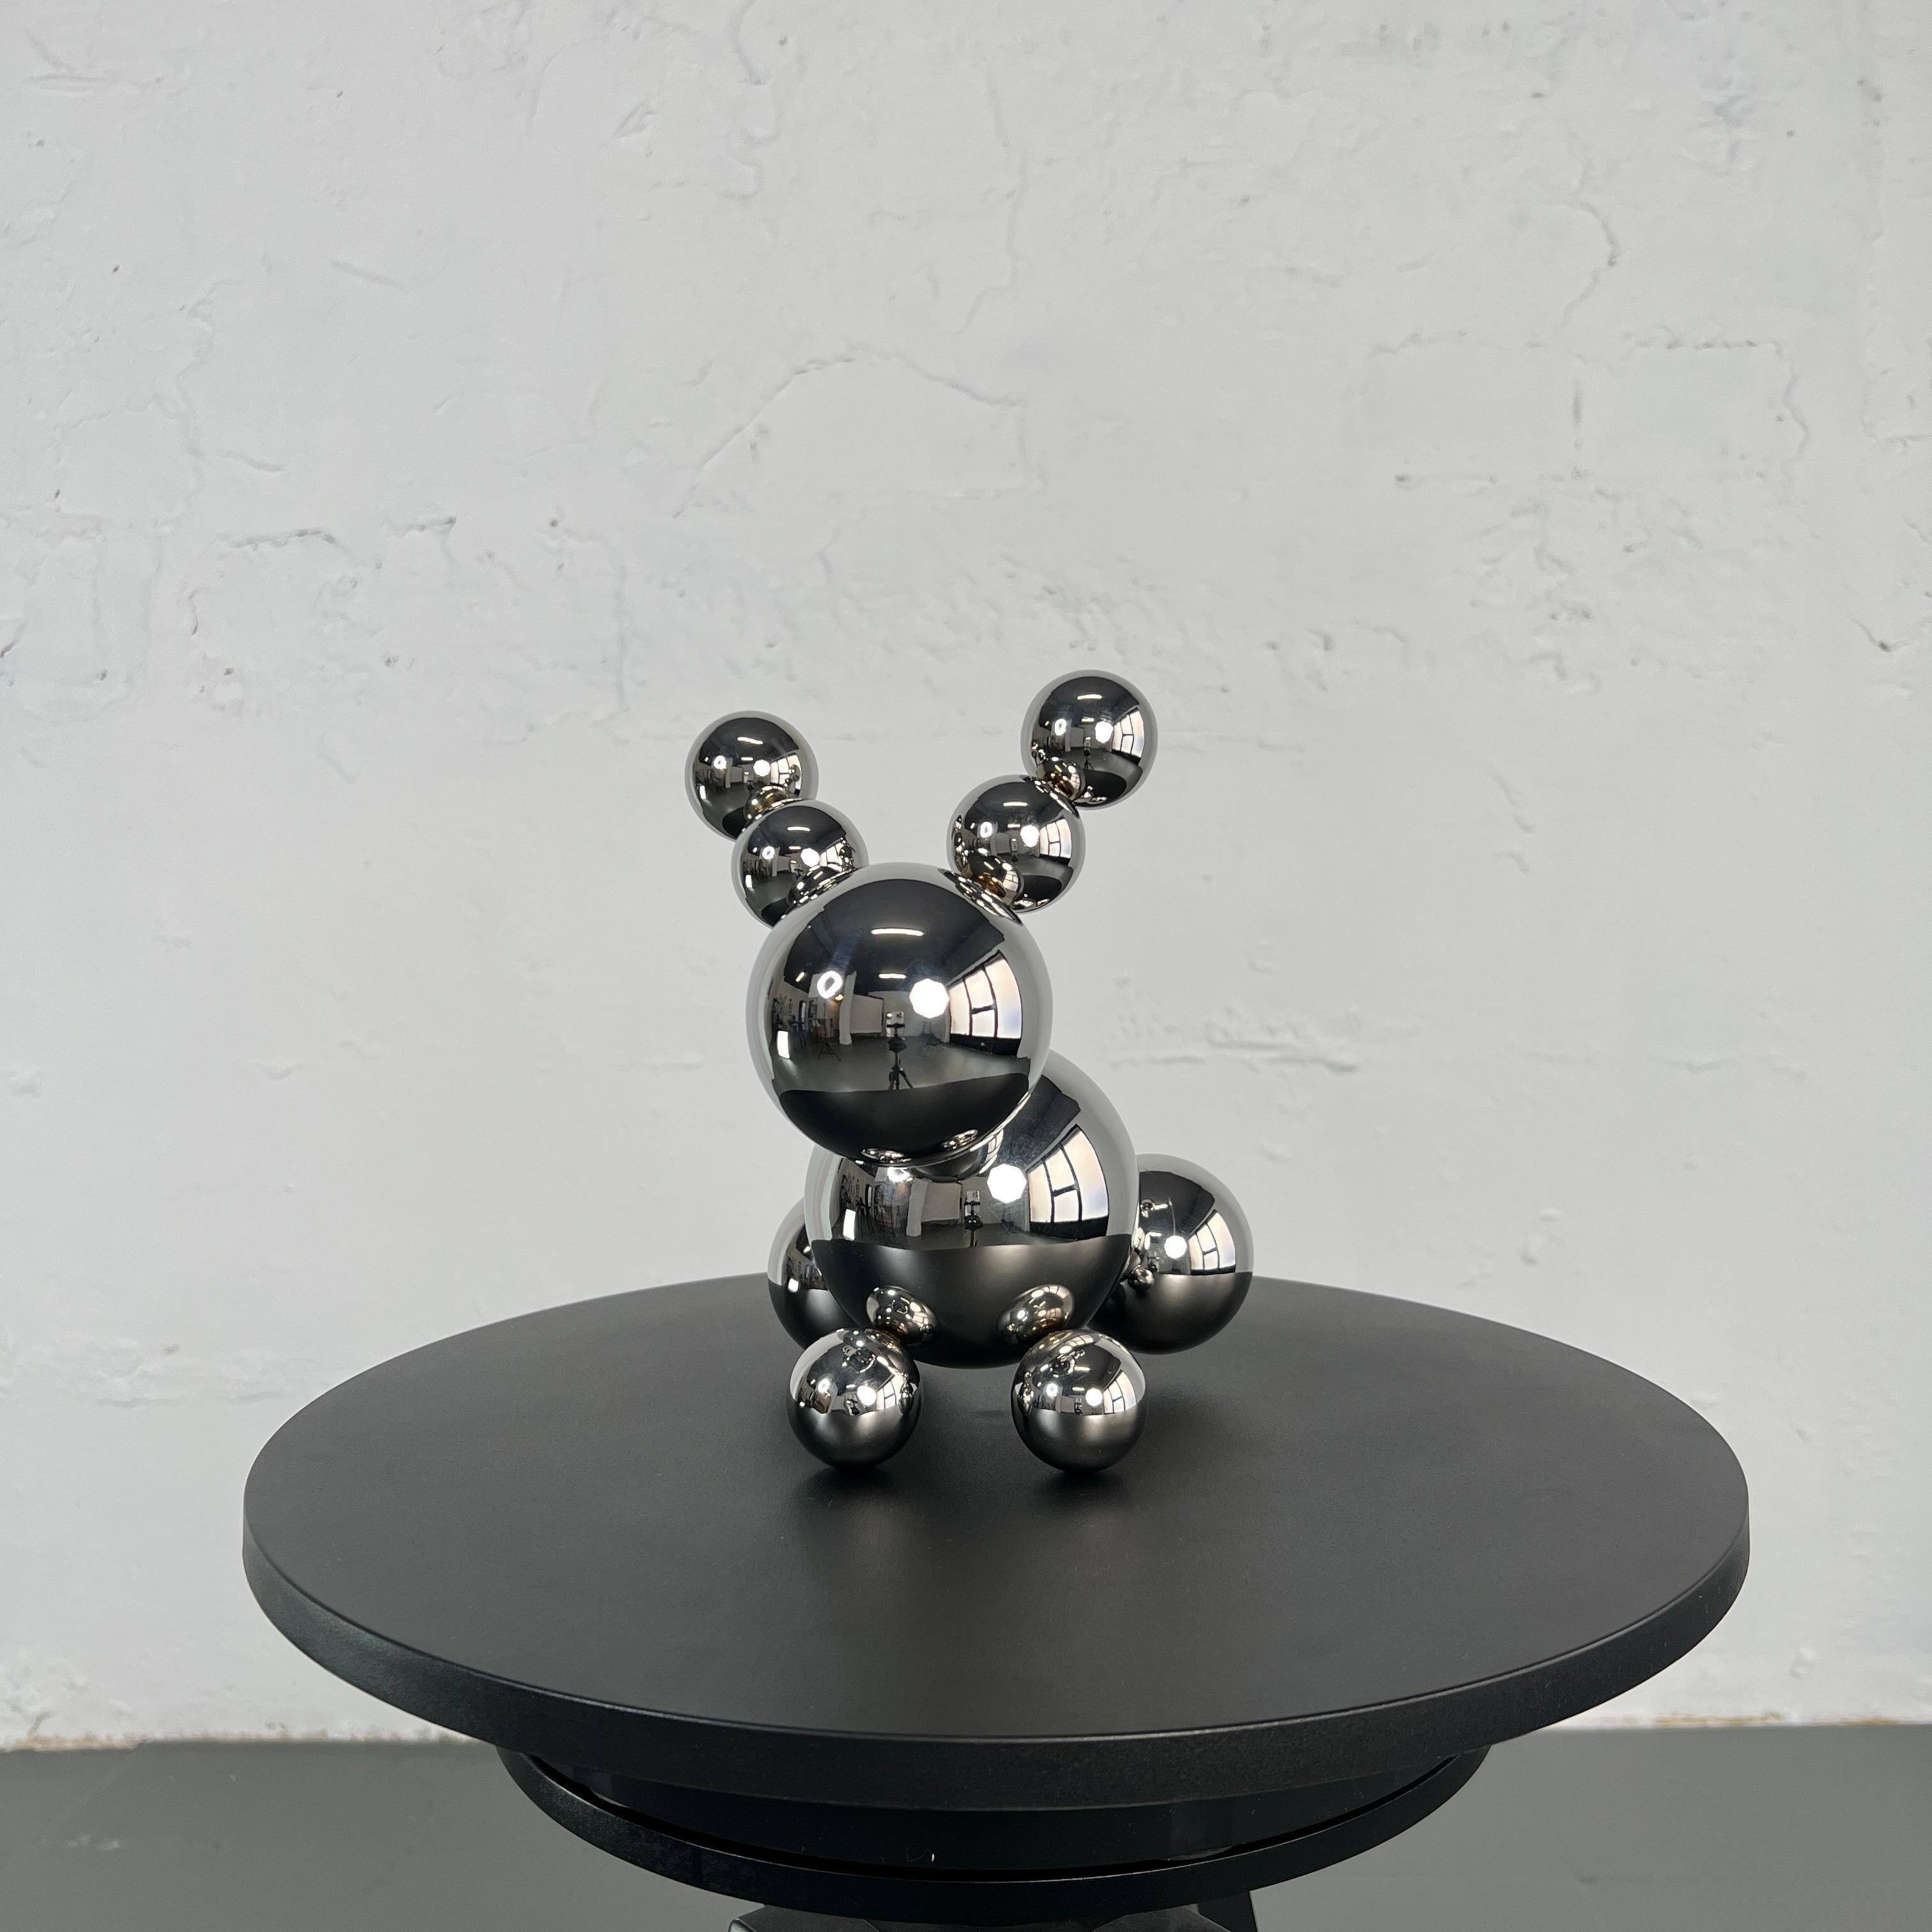 Stainless Steel Rabbit Bunny Robot 'Ears Up!' Minimalistic Art For Sale 3